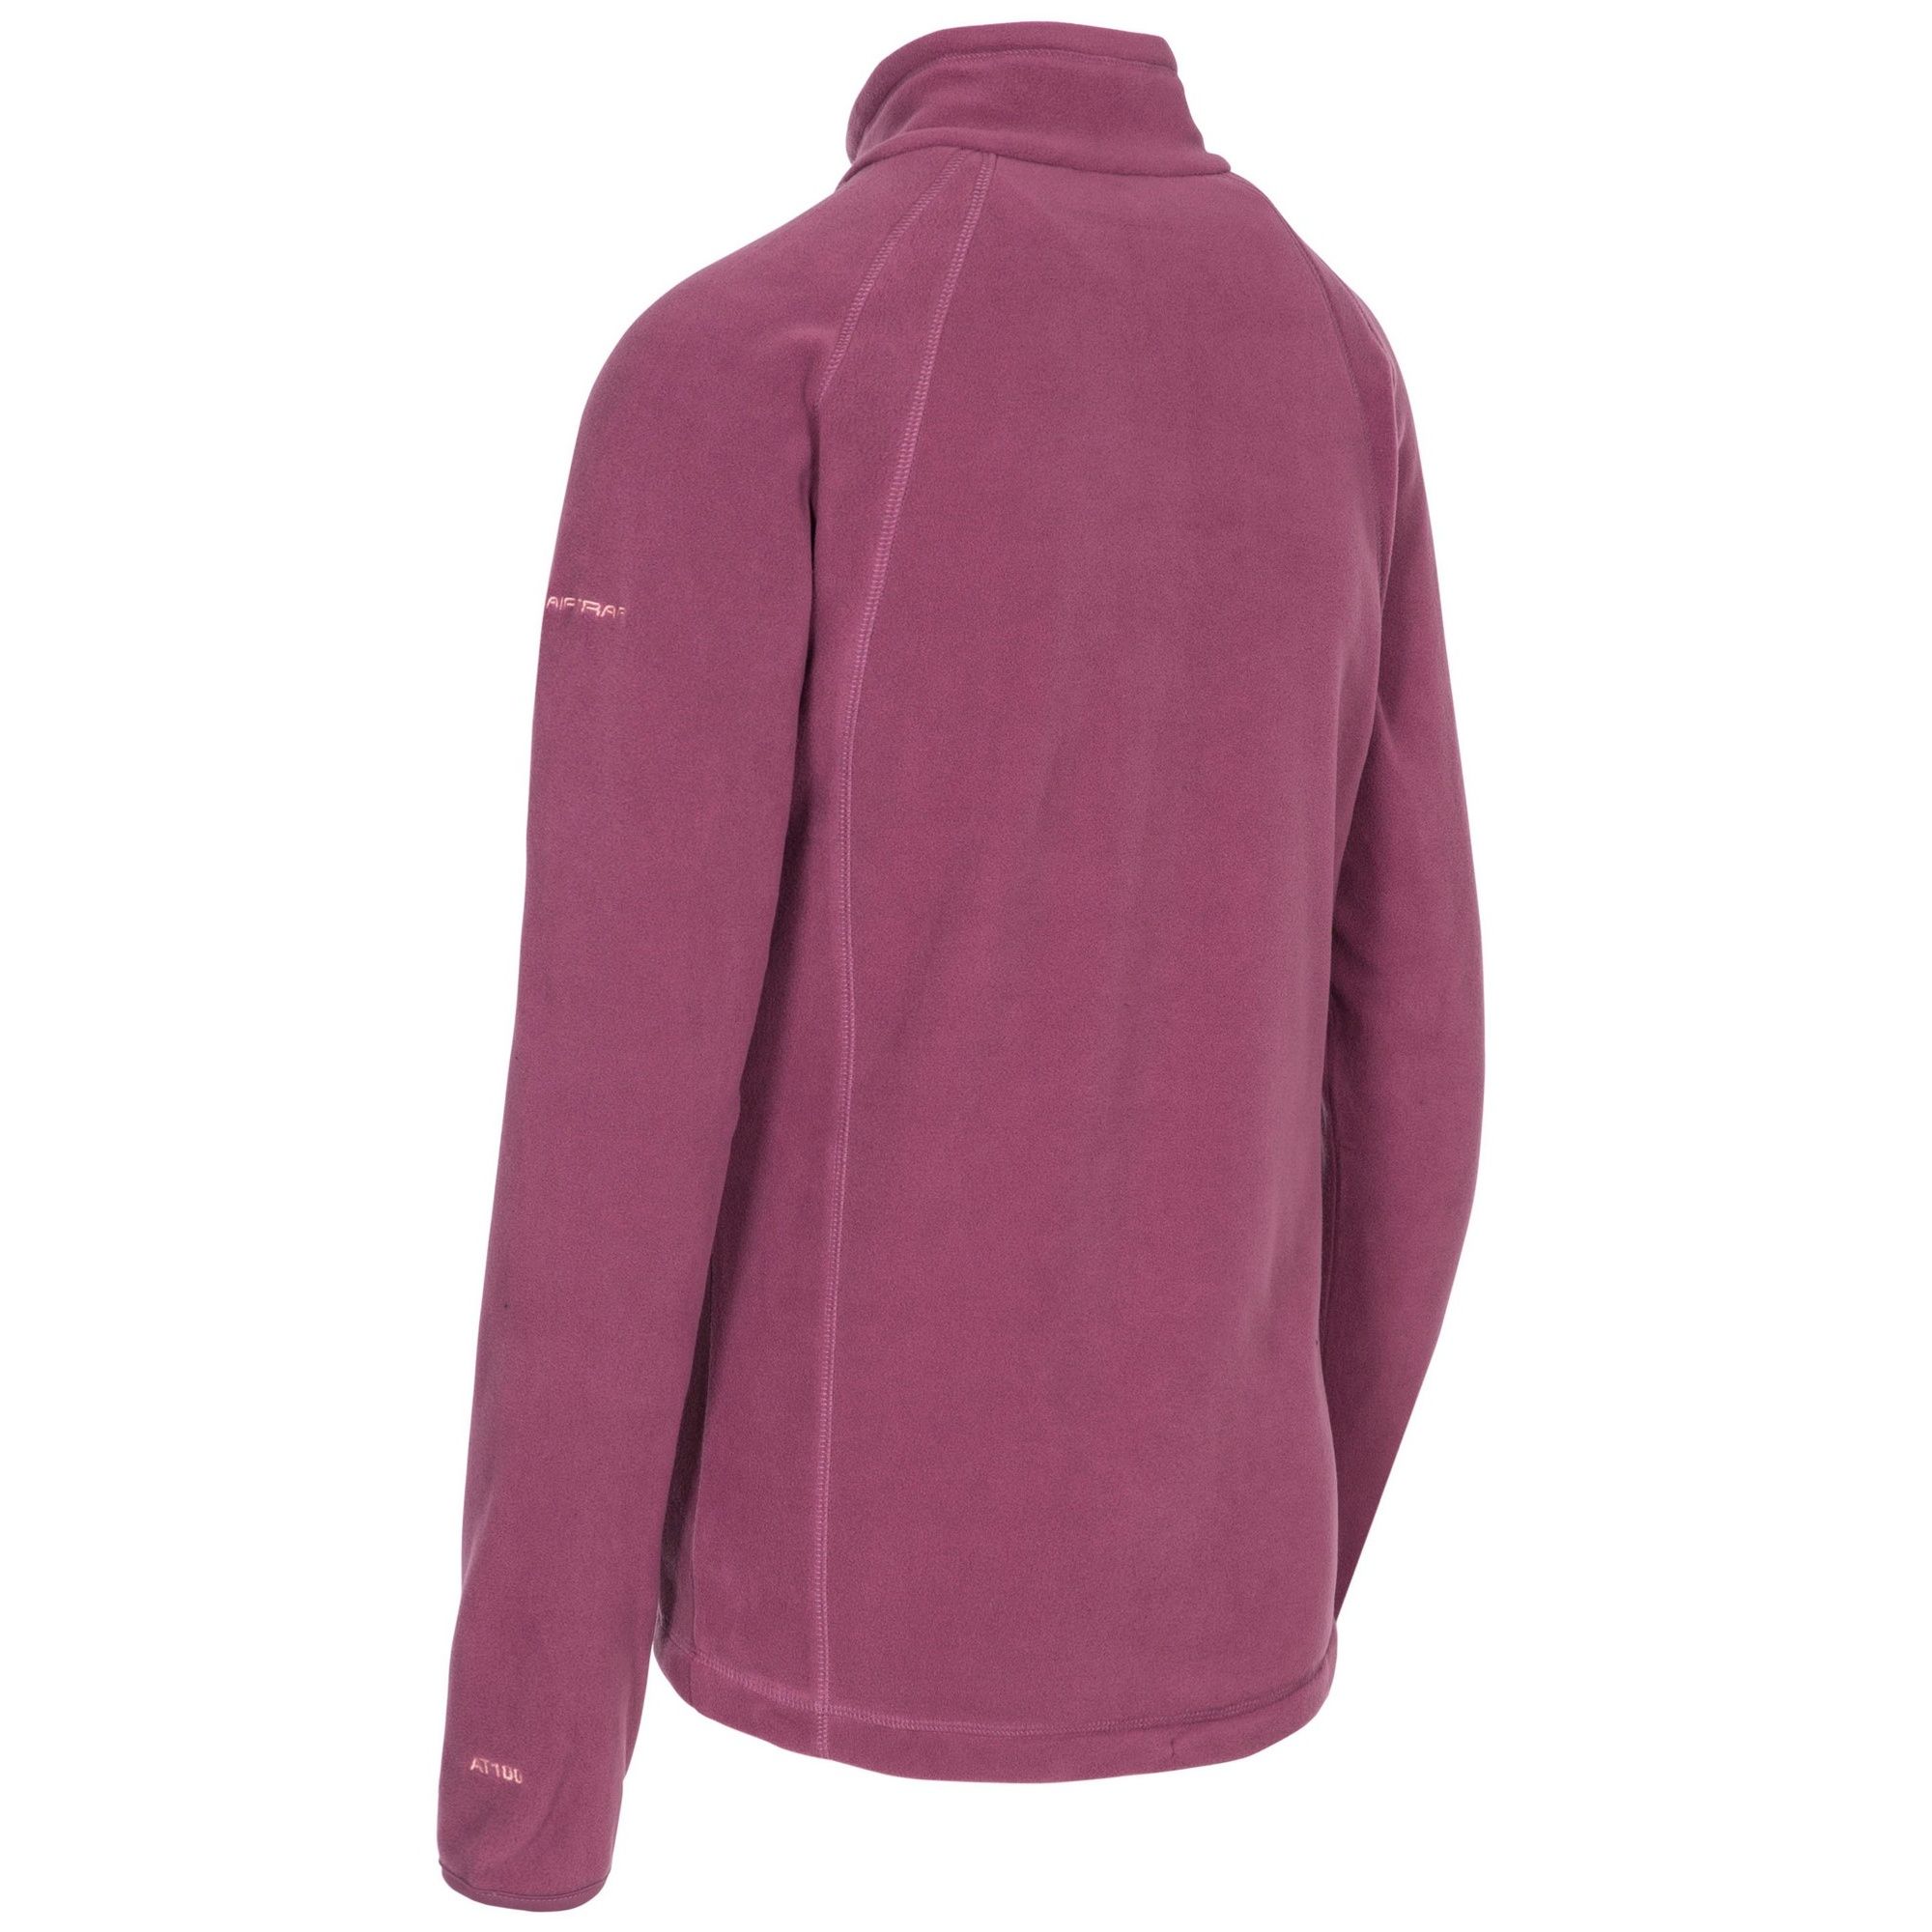 100% Polyester. Microfleece. Both sides brushed. Anti-pilling. Full front zip. 2 zip pockets. Binding at cuffs. Adjustable hem drawcord. Airtrap. 170gsm. Trespass Womens Chest Sizing (approx): XS/8 - 32in/81cm, S/10 - 34in/86cm, M/12 - 36in/91.4cm, L/14 - 38in/96.5cm, XL/16 - 40in/101.5cm, XXL/18 - 42in/106.5cm.